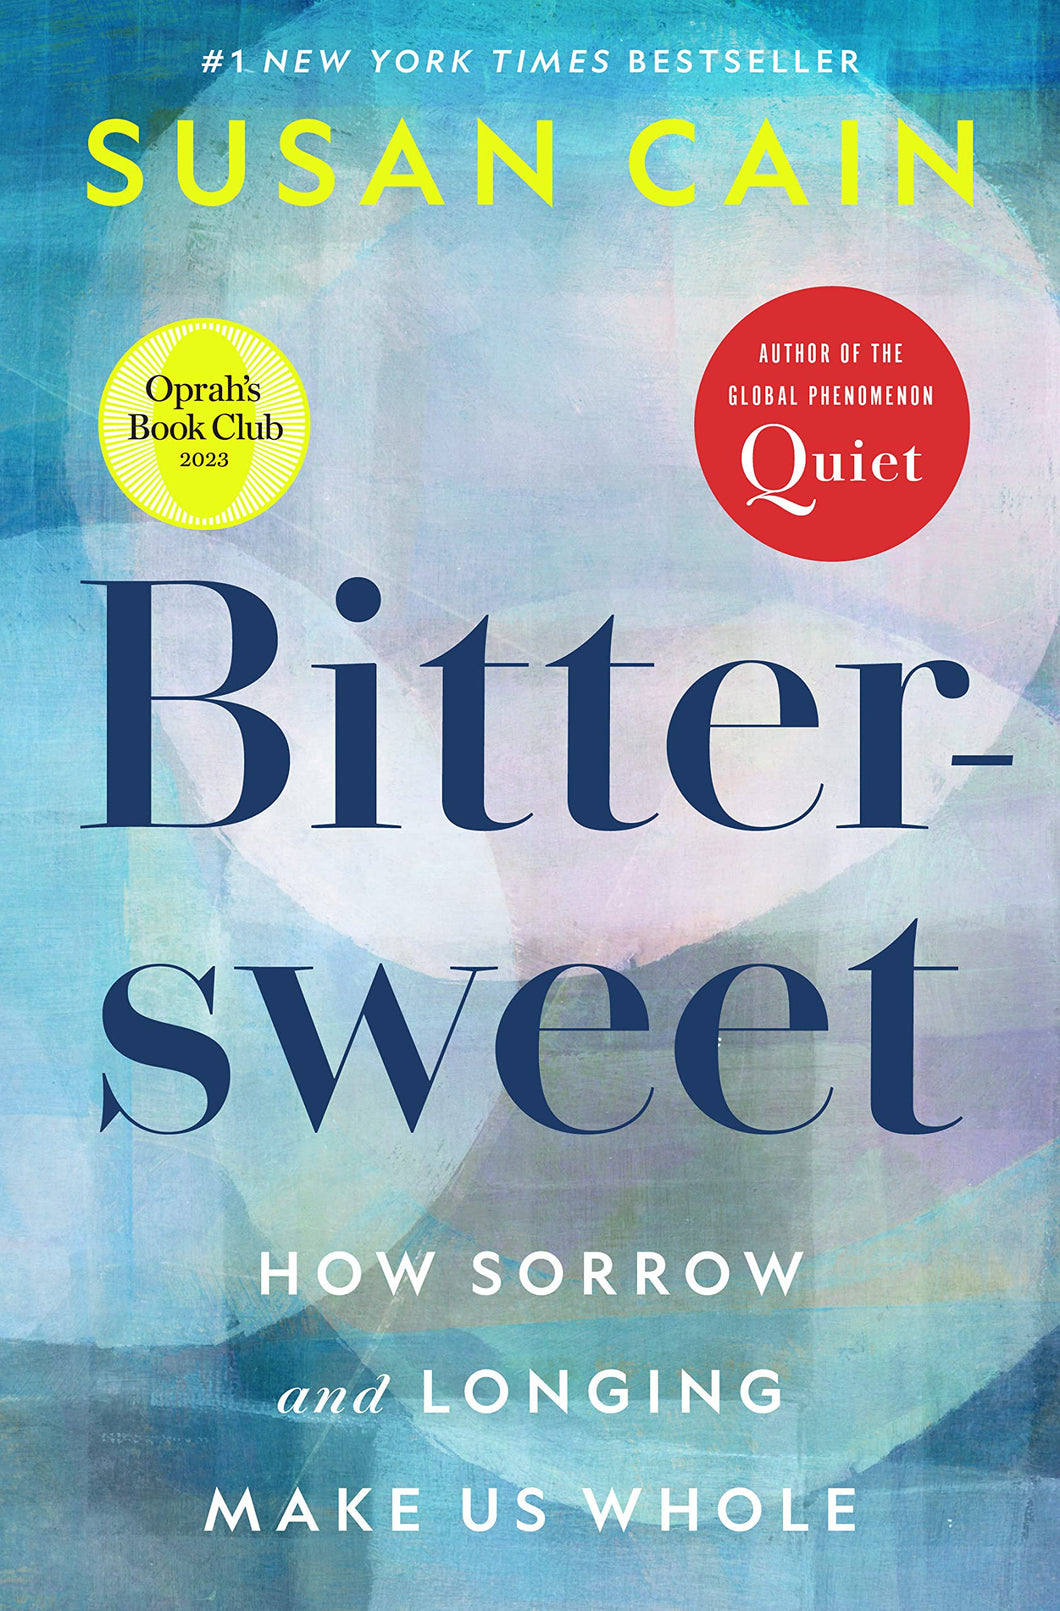 Bittersweet: How Sorrow And Longing Make Us Whole [Susan Cain]